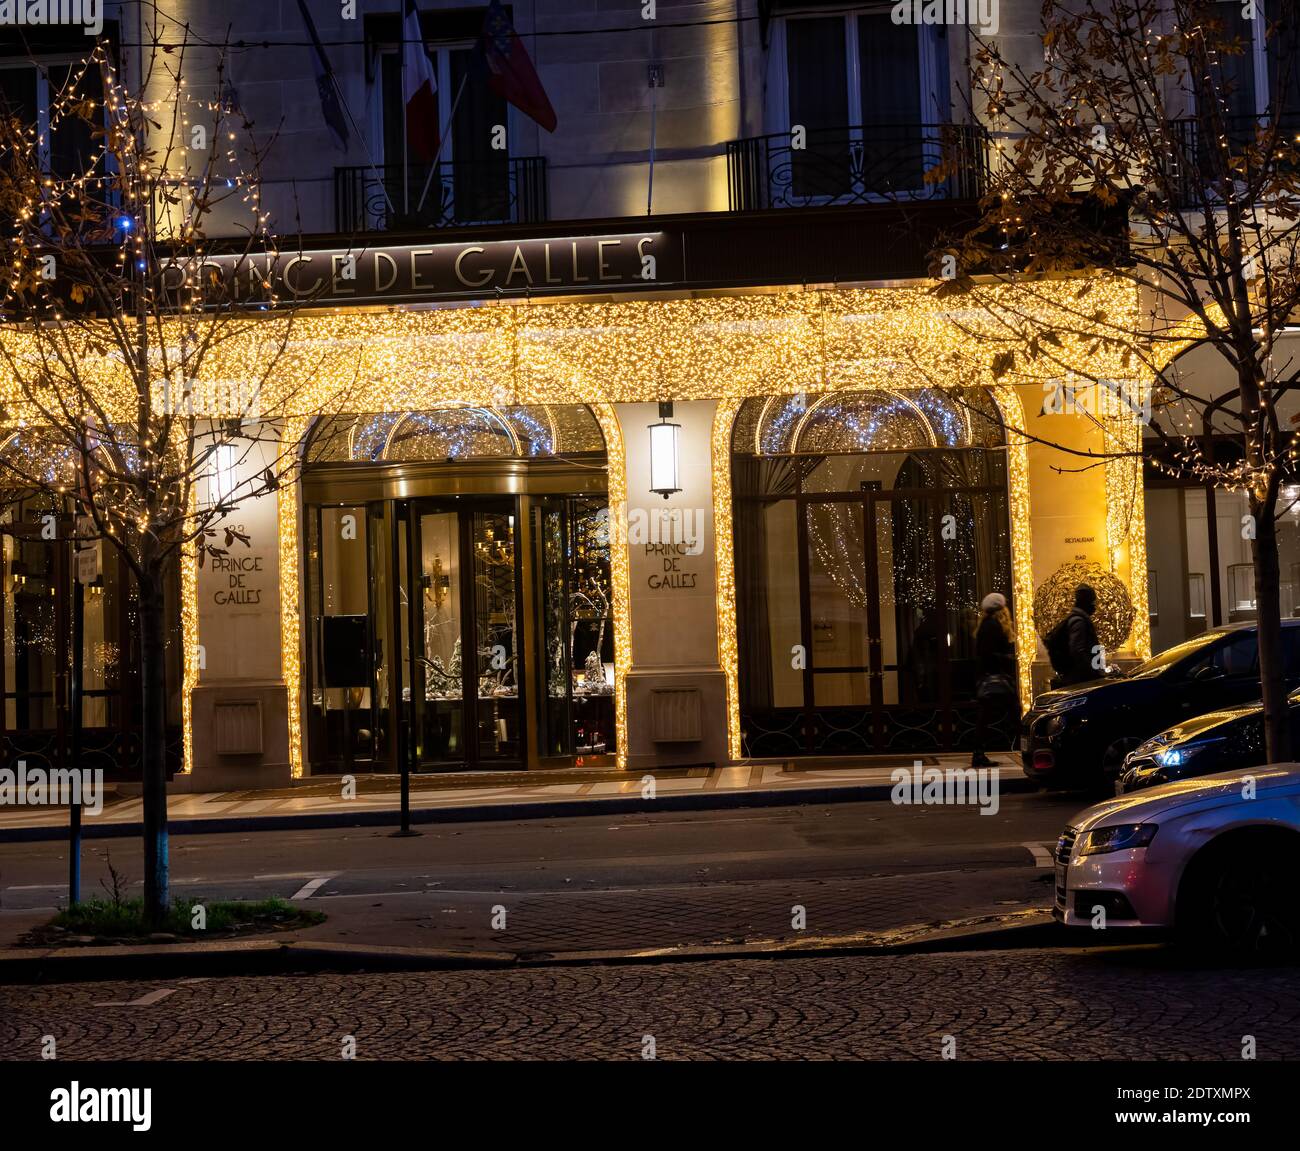 Prince de Galles Hotel with Christmas lights on avenue George V - Paris, France Stock Photo